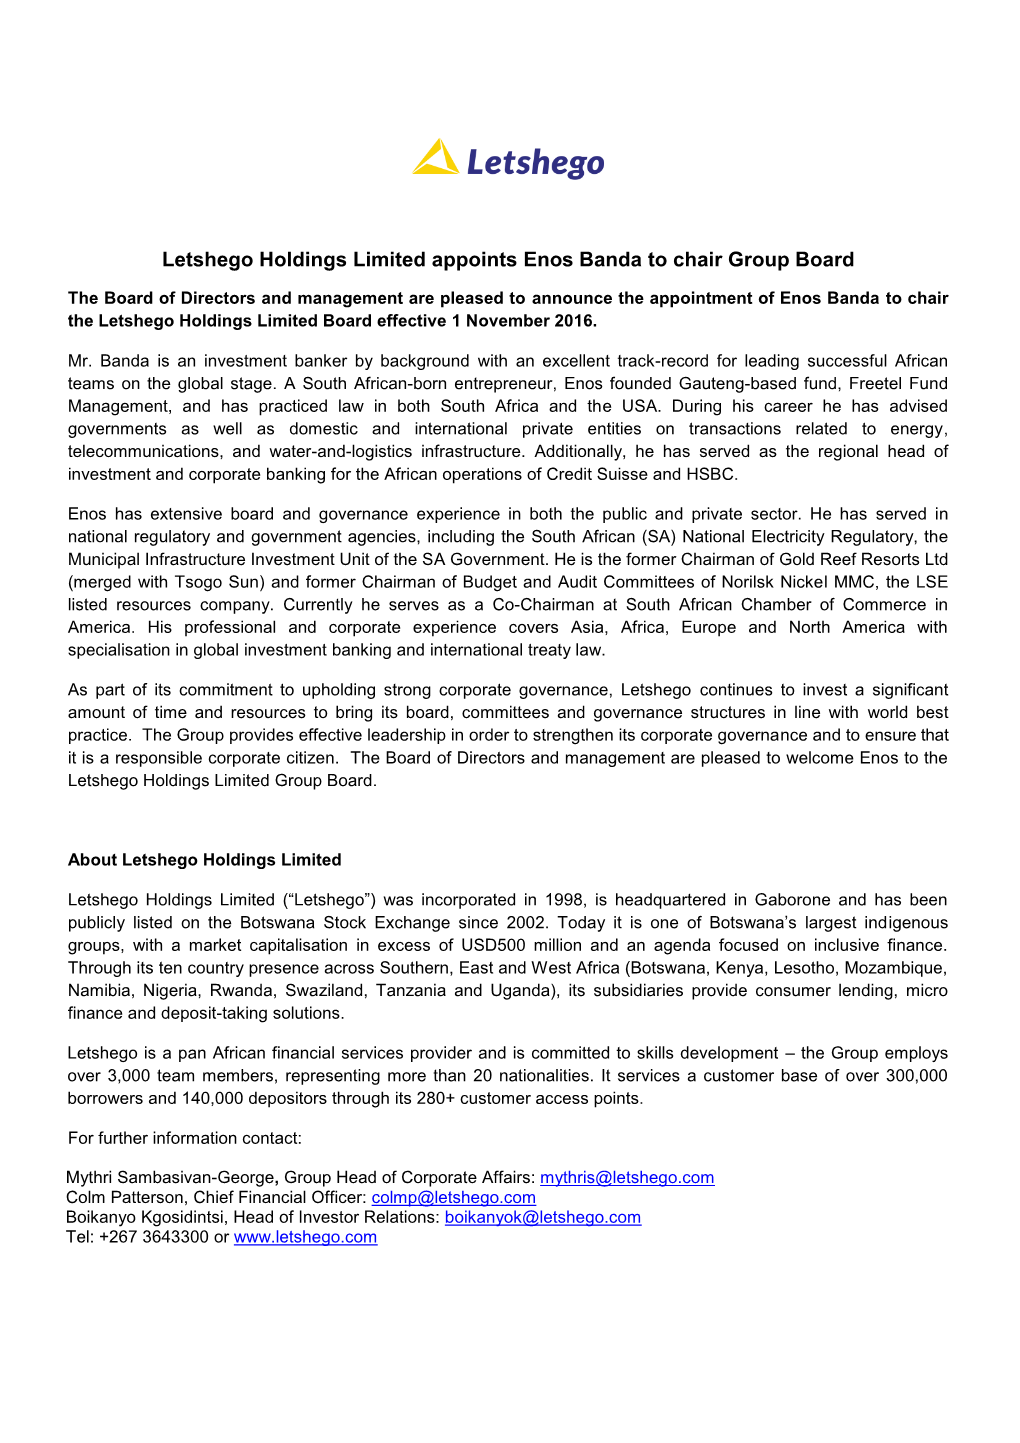 Letshego Holdings Limited Appoints Enos Banda to Chair Group Board